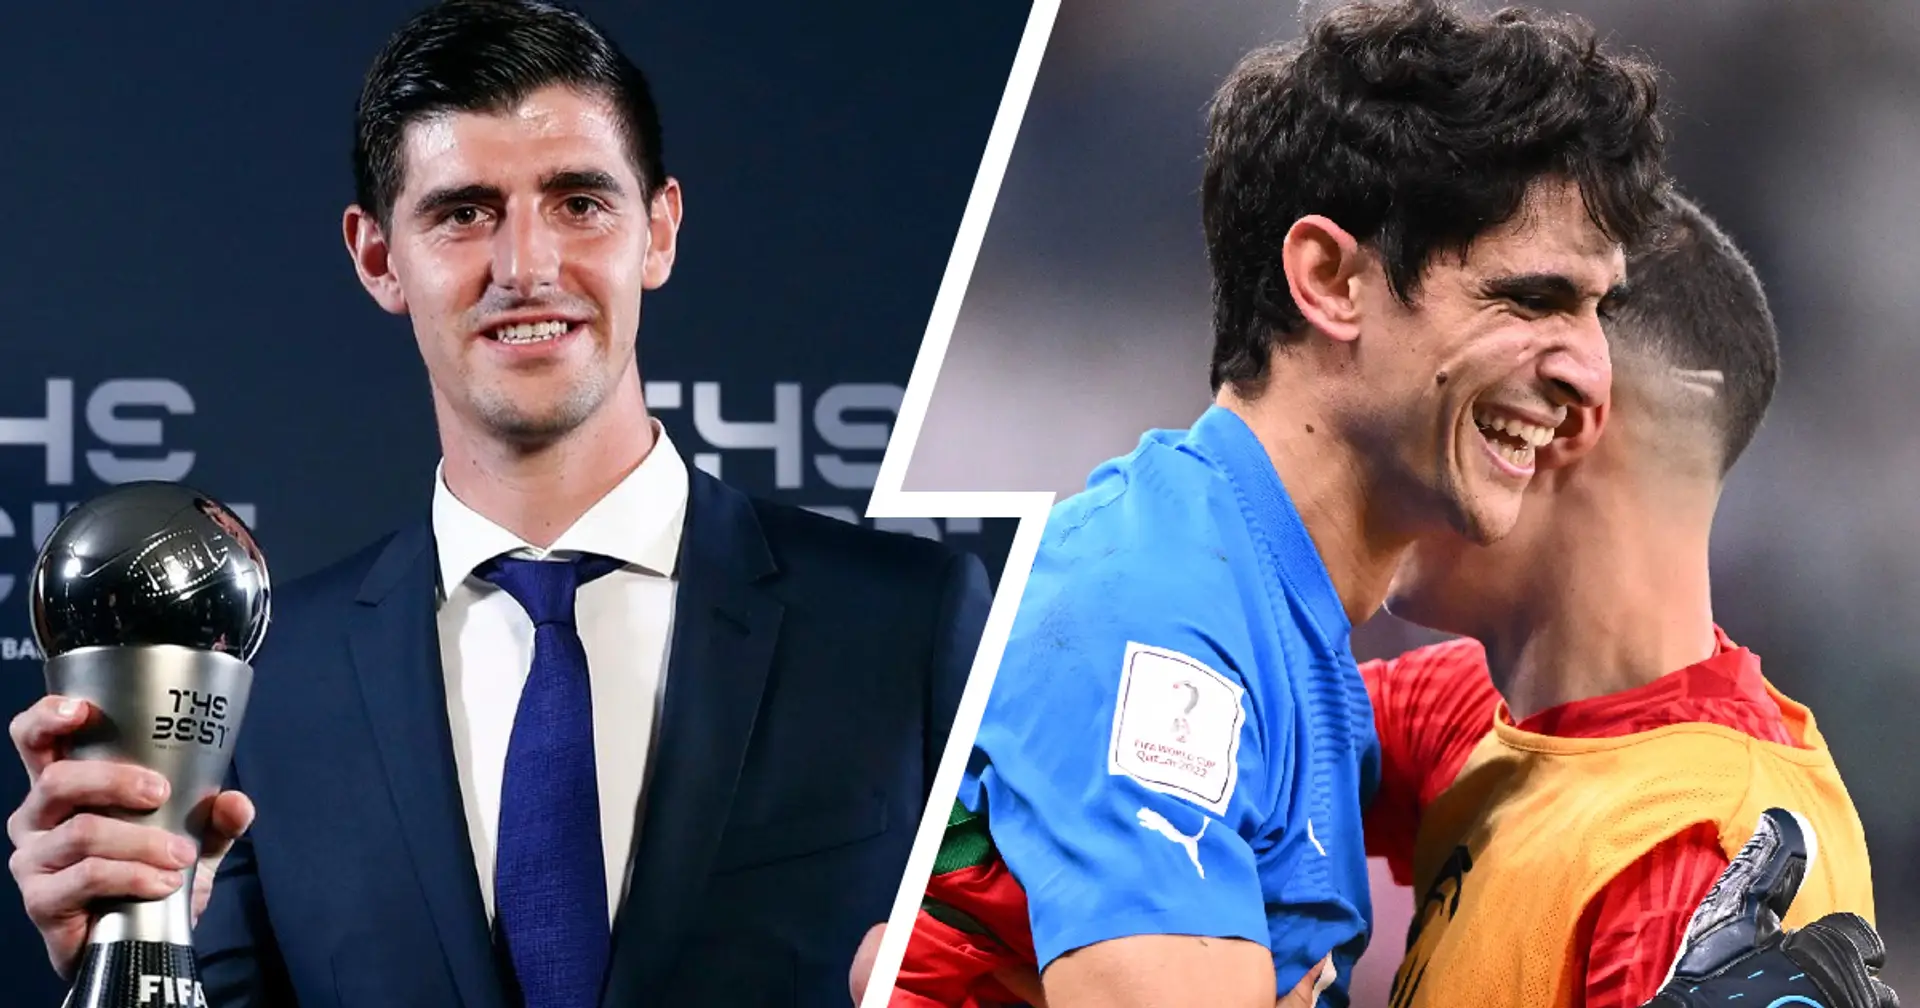 FIFA names top 3 best goalkeepers of 2022 — Courtois in